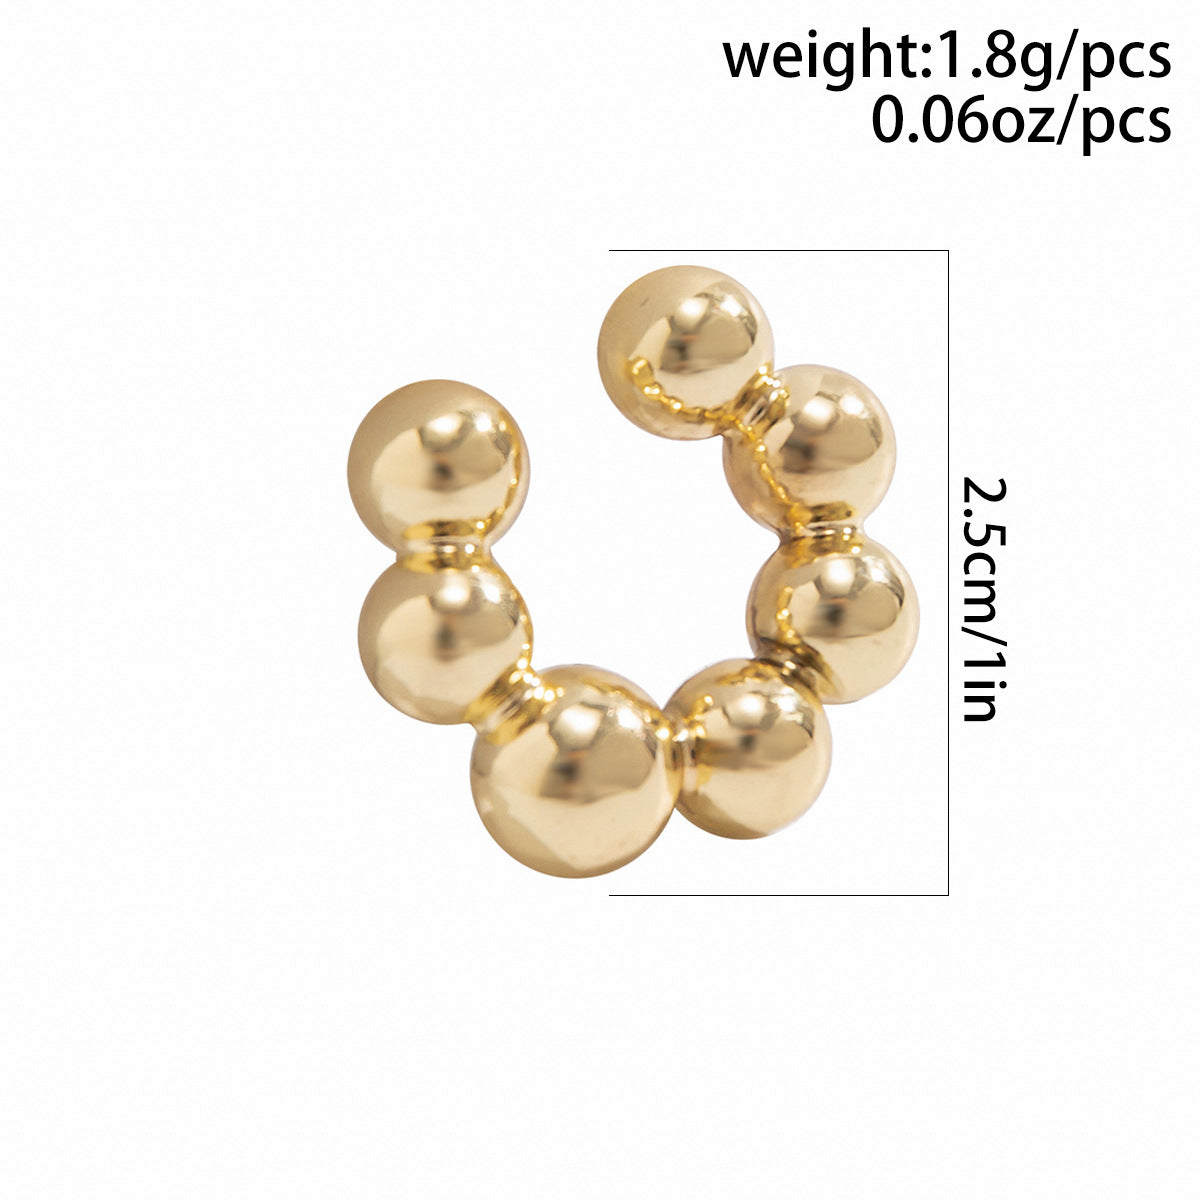 Exquisite Single-Sell Cross-border Color Thread Ear Clip with Chic Design